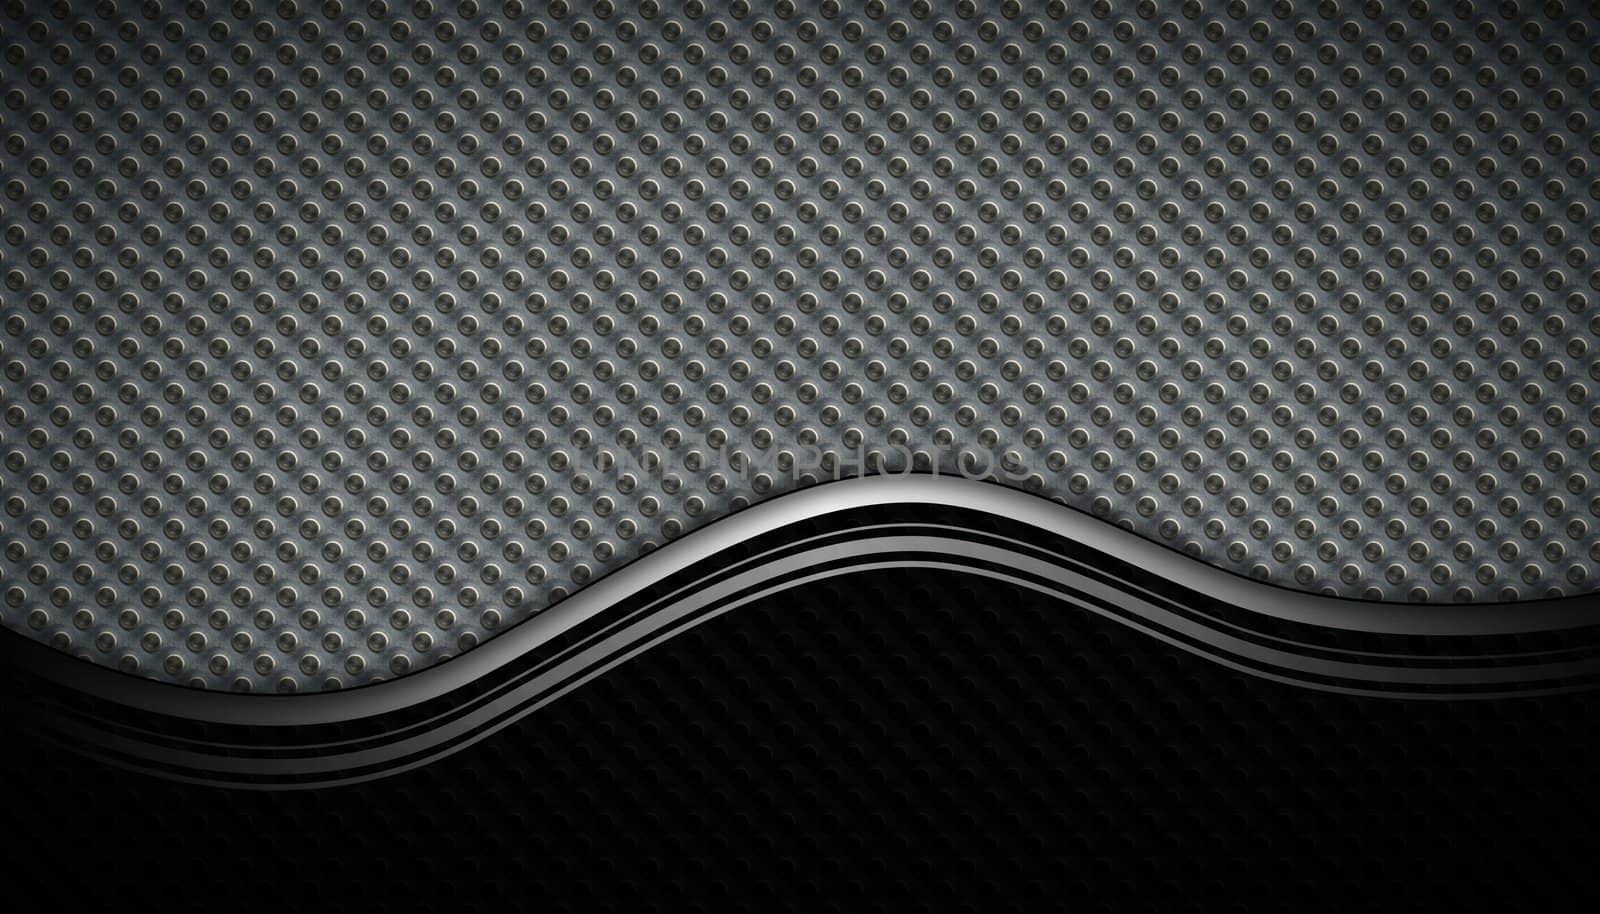 metal background with black and white curved layers